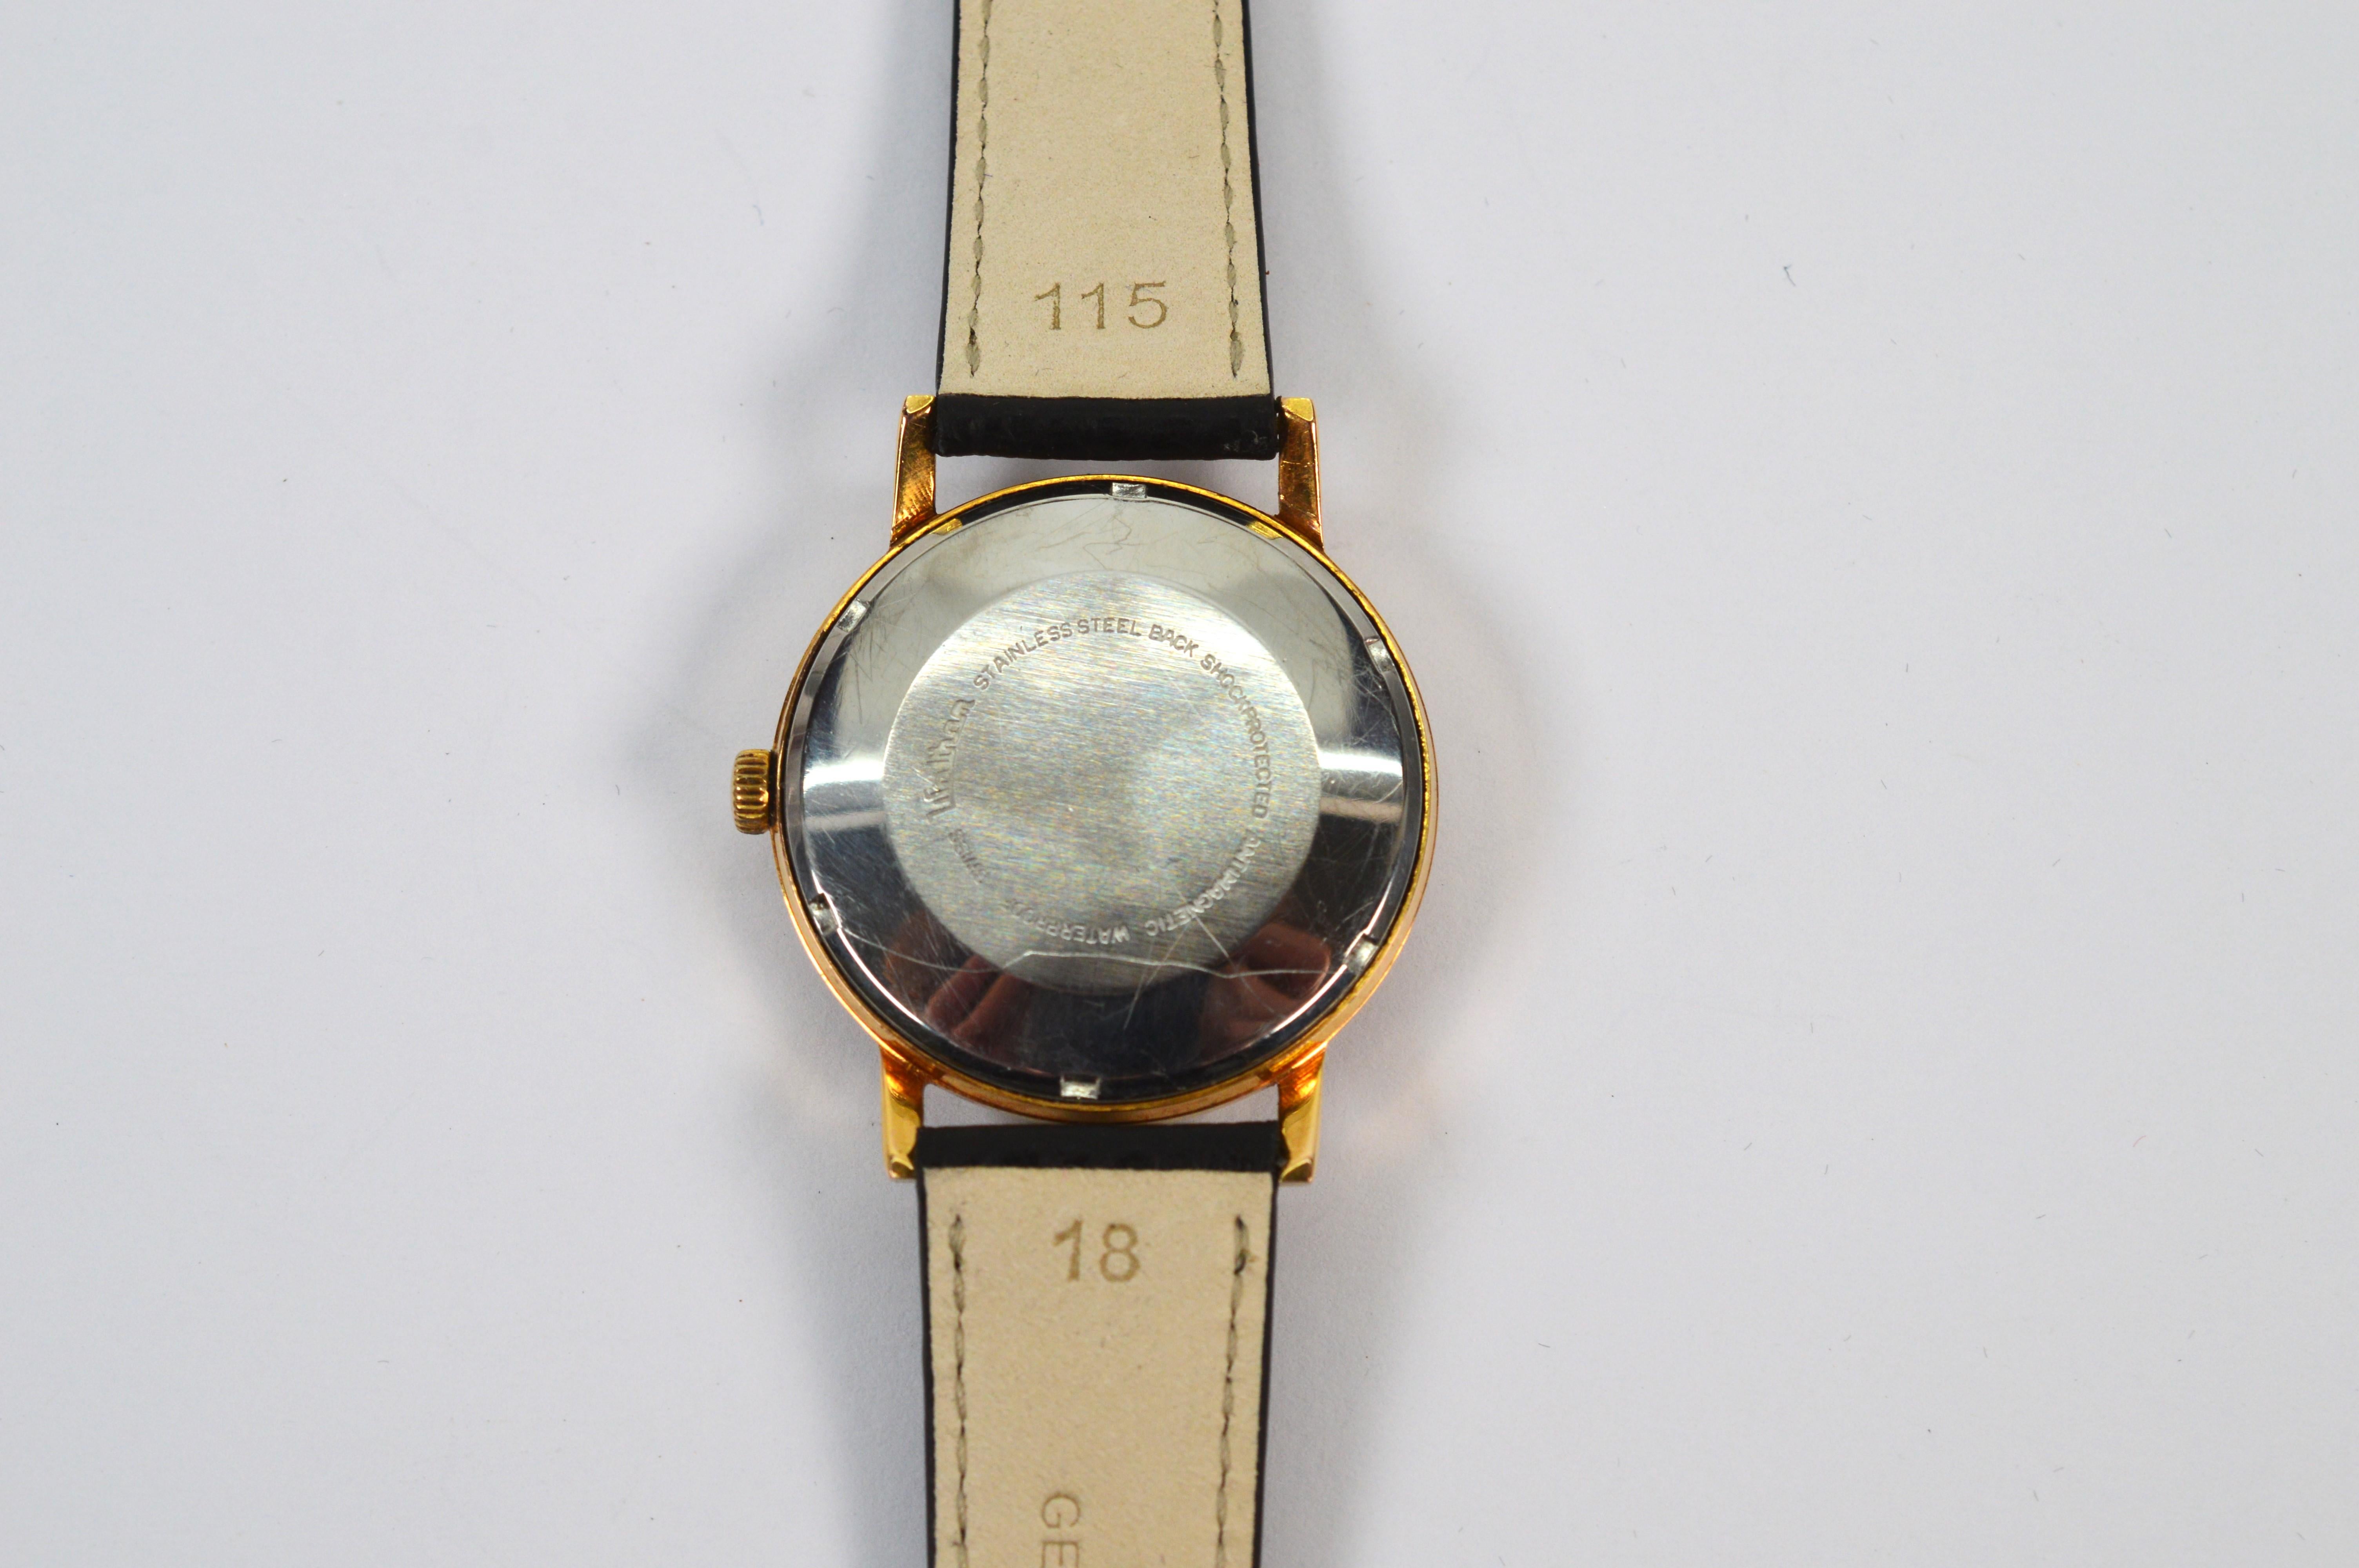 Waltham Fontomatic Men's Wrist Watch w Date In Excellent Condition For Sale In Mount Kisco, NY